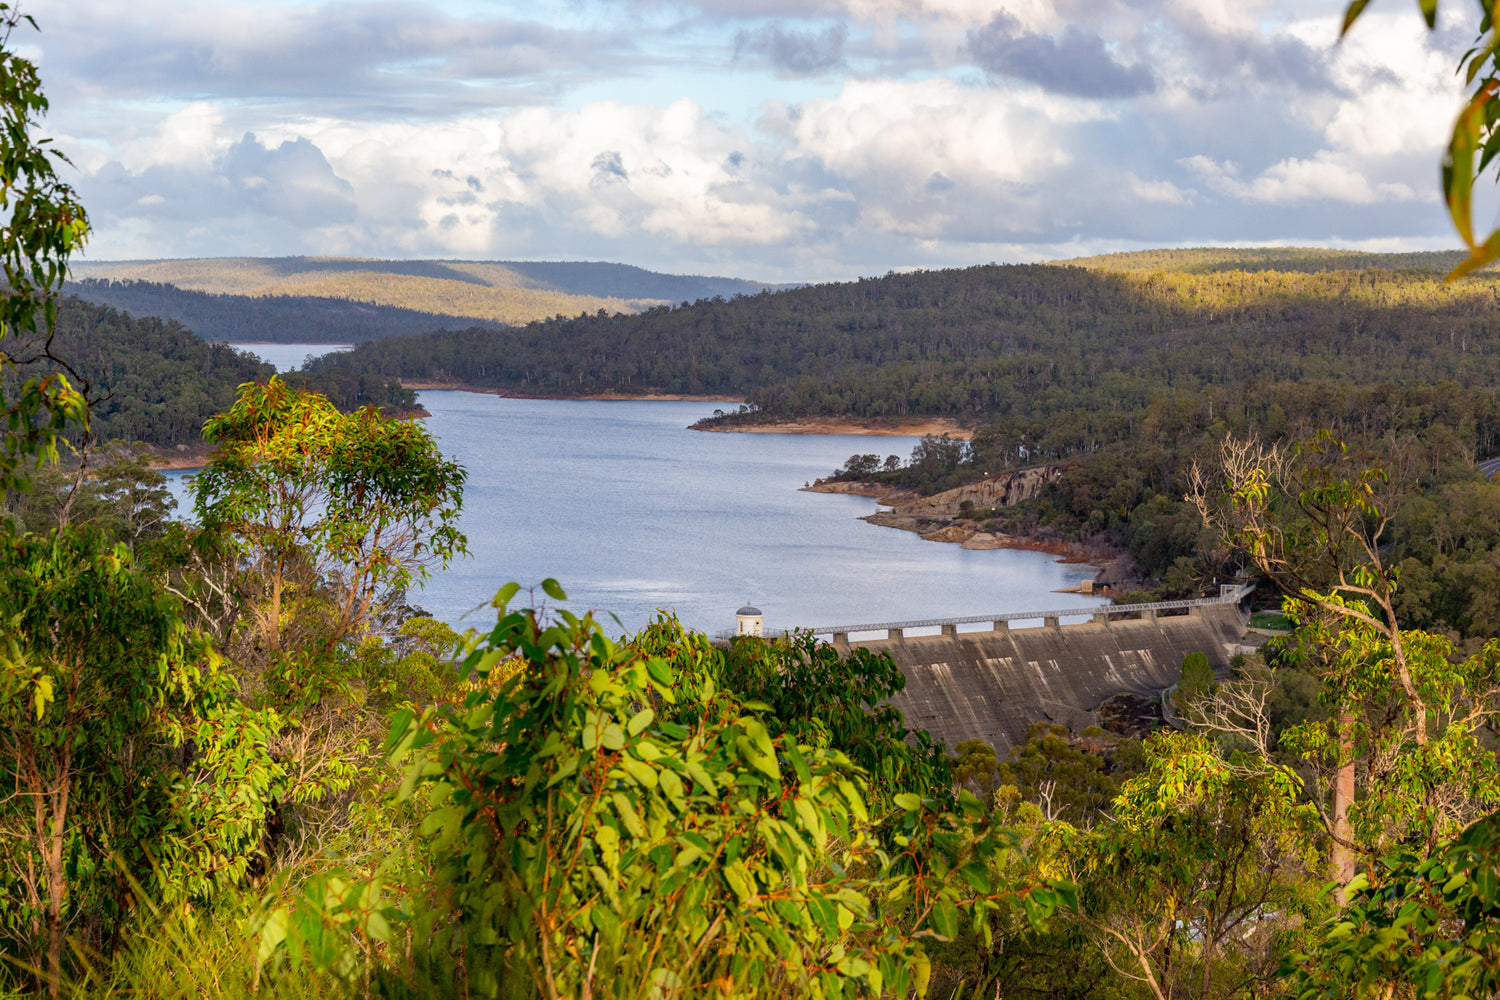 View of Mundaring Weir and Lake CY O’Connor from North Ledge Lookout